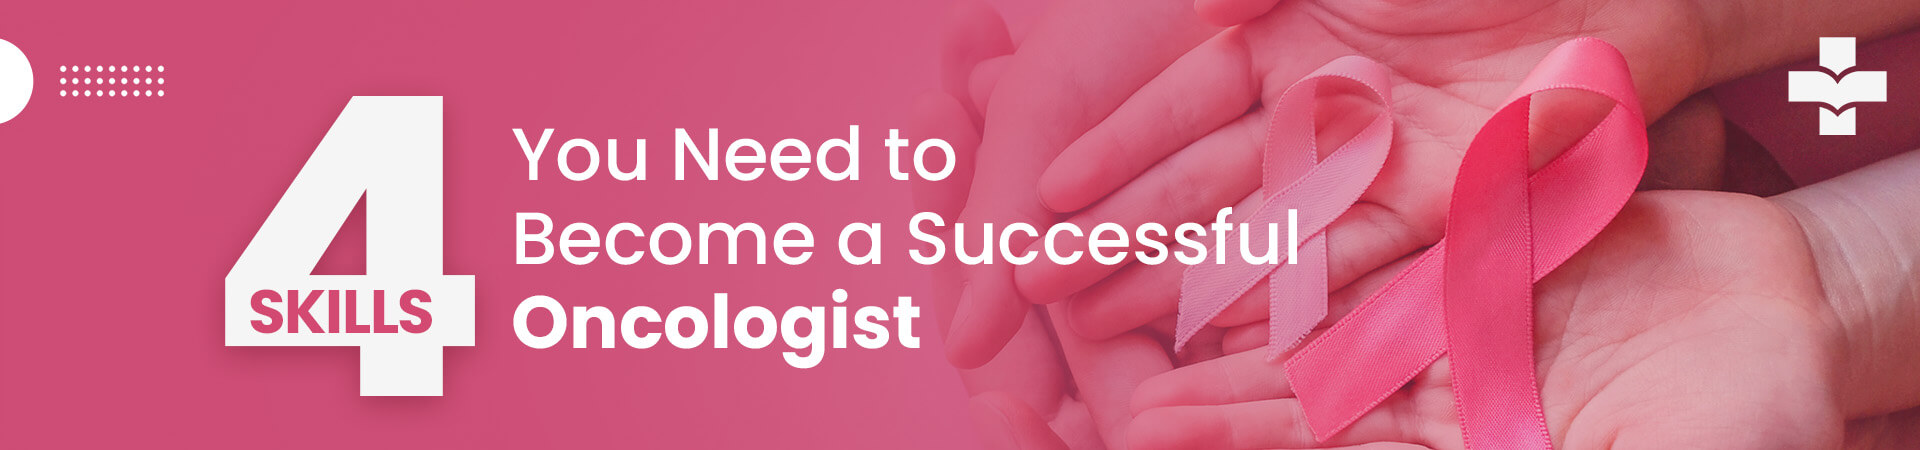 Skills You Need To Become A Successful Oncologist.